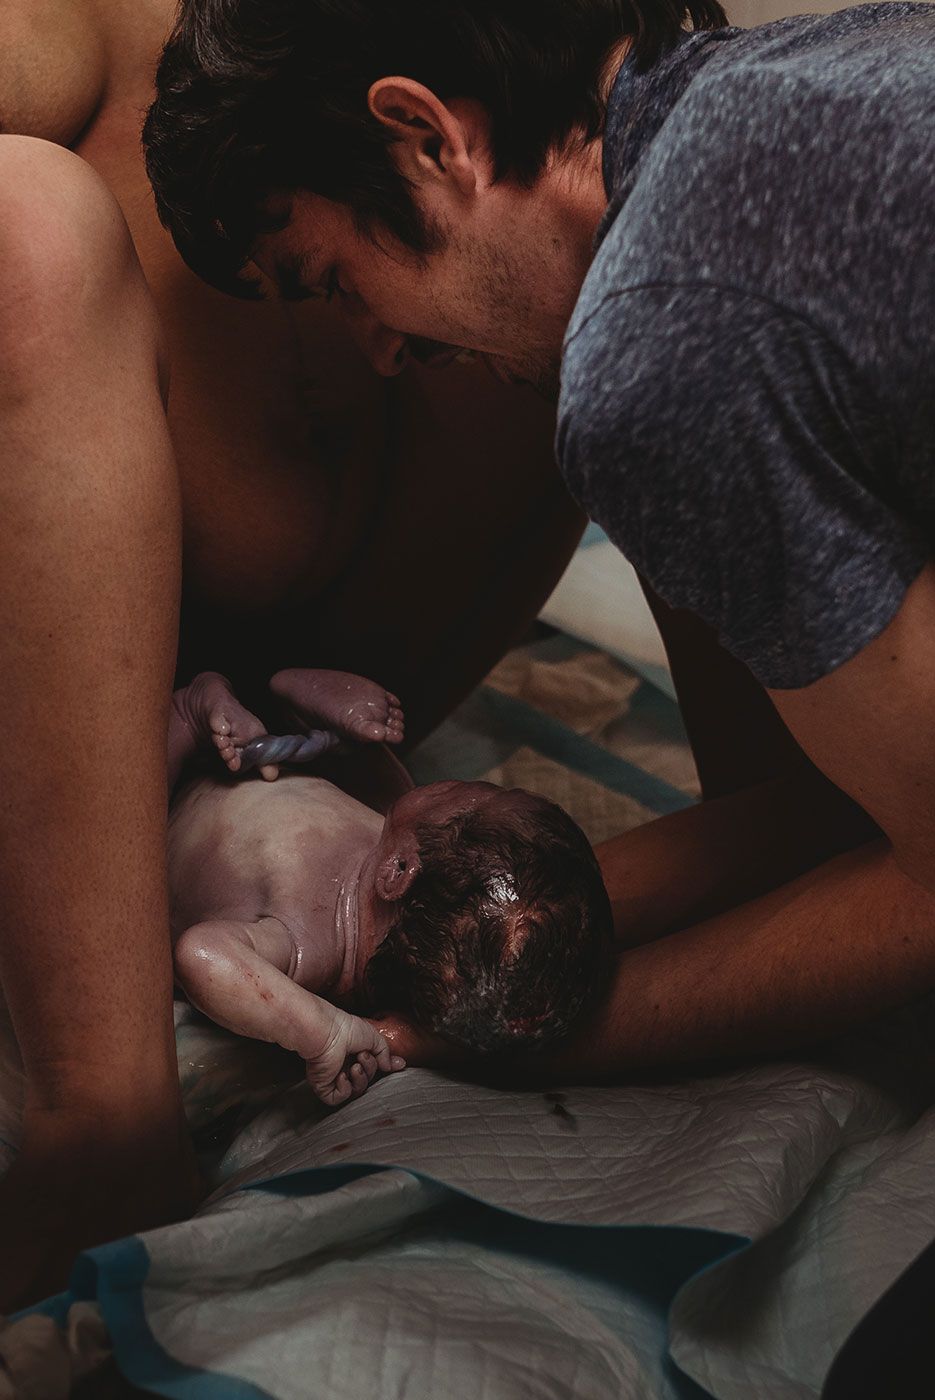 dad catches his baby being born at home